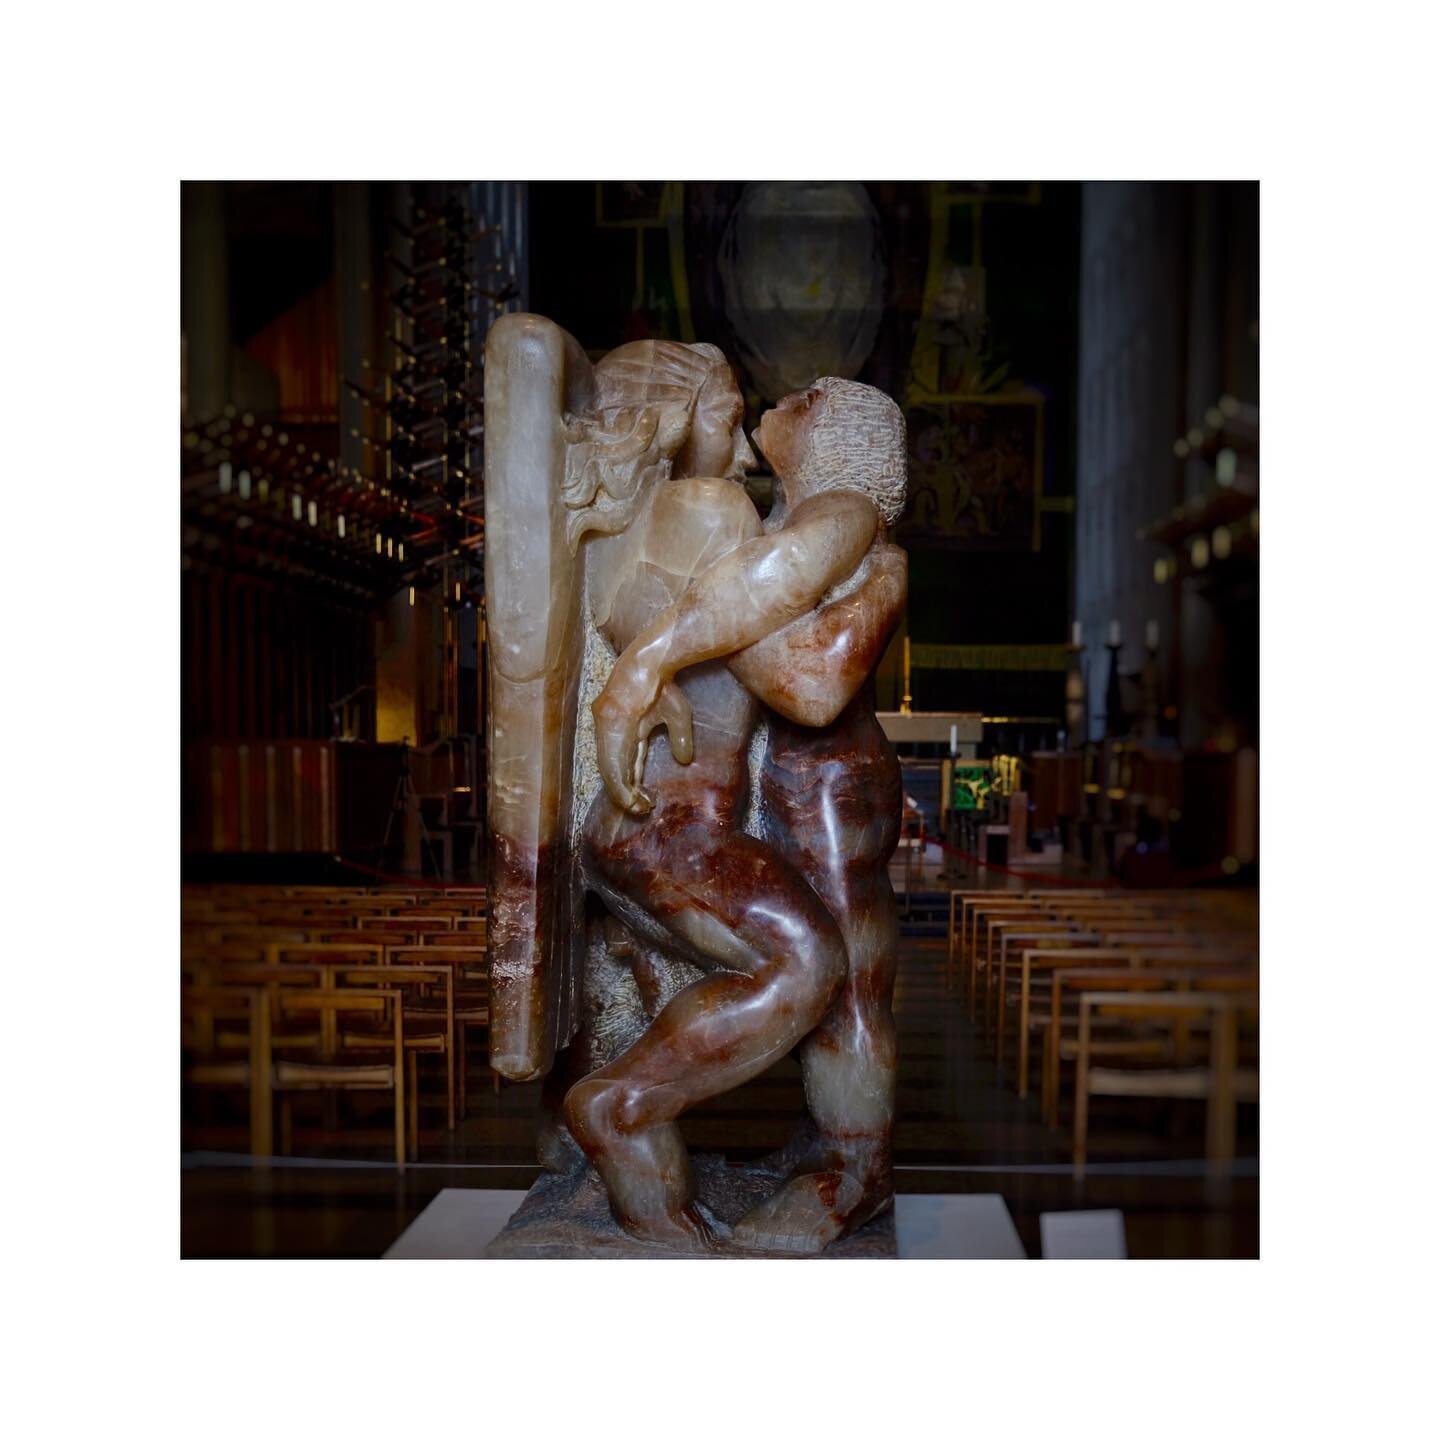 I went to see the Jacob Epstein exhibition at #coventrycathedral and found it both captivating and moving. Coventry Cathedral is very special and Jacob and the Angel has been a favourite of mine for a while. Such a beautiful expression of struggle an